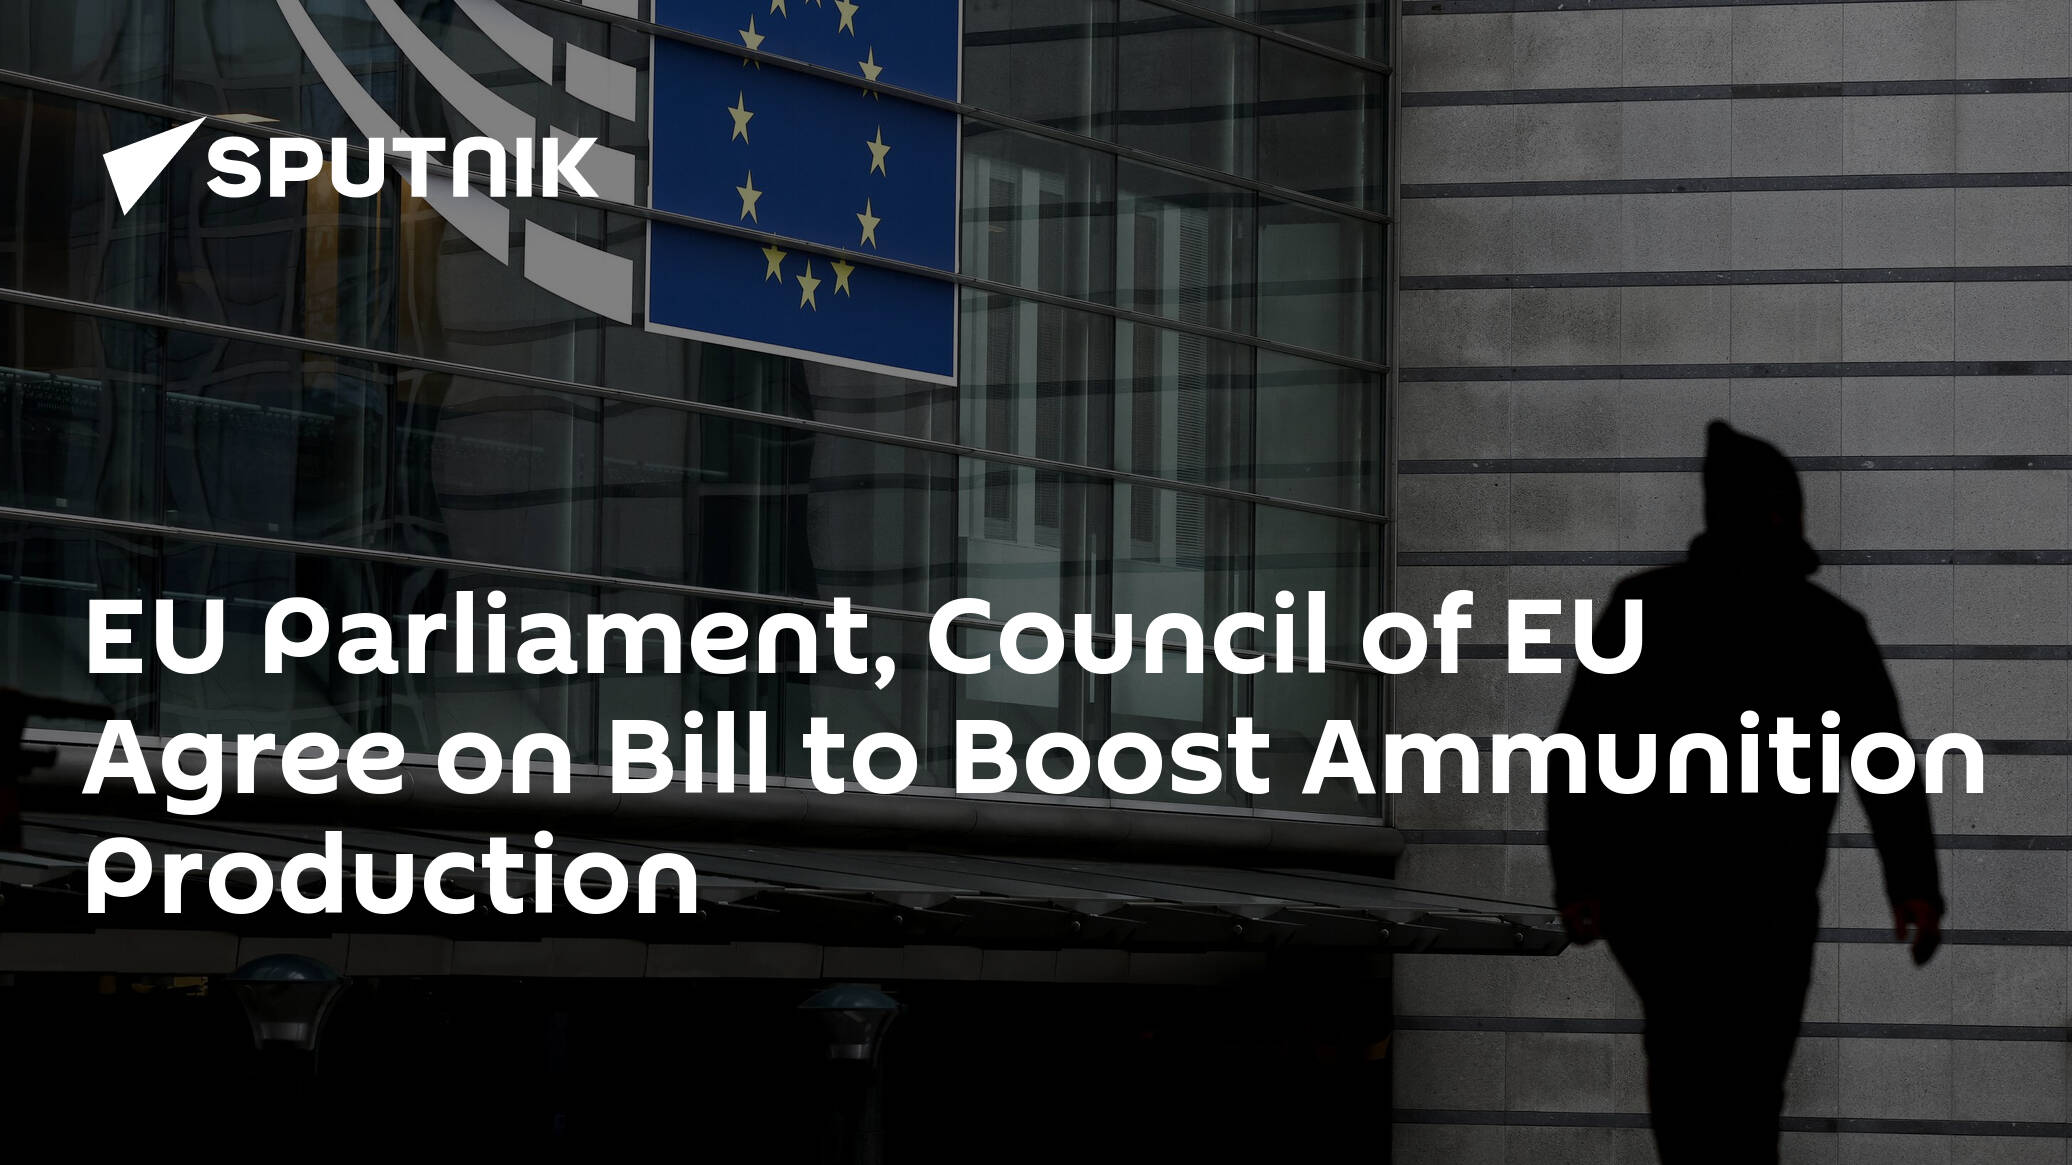 EU Parliament, Council of EU Agree on Bill to Boost Ammunition Production